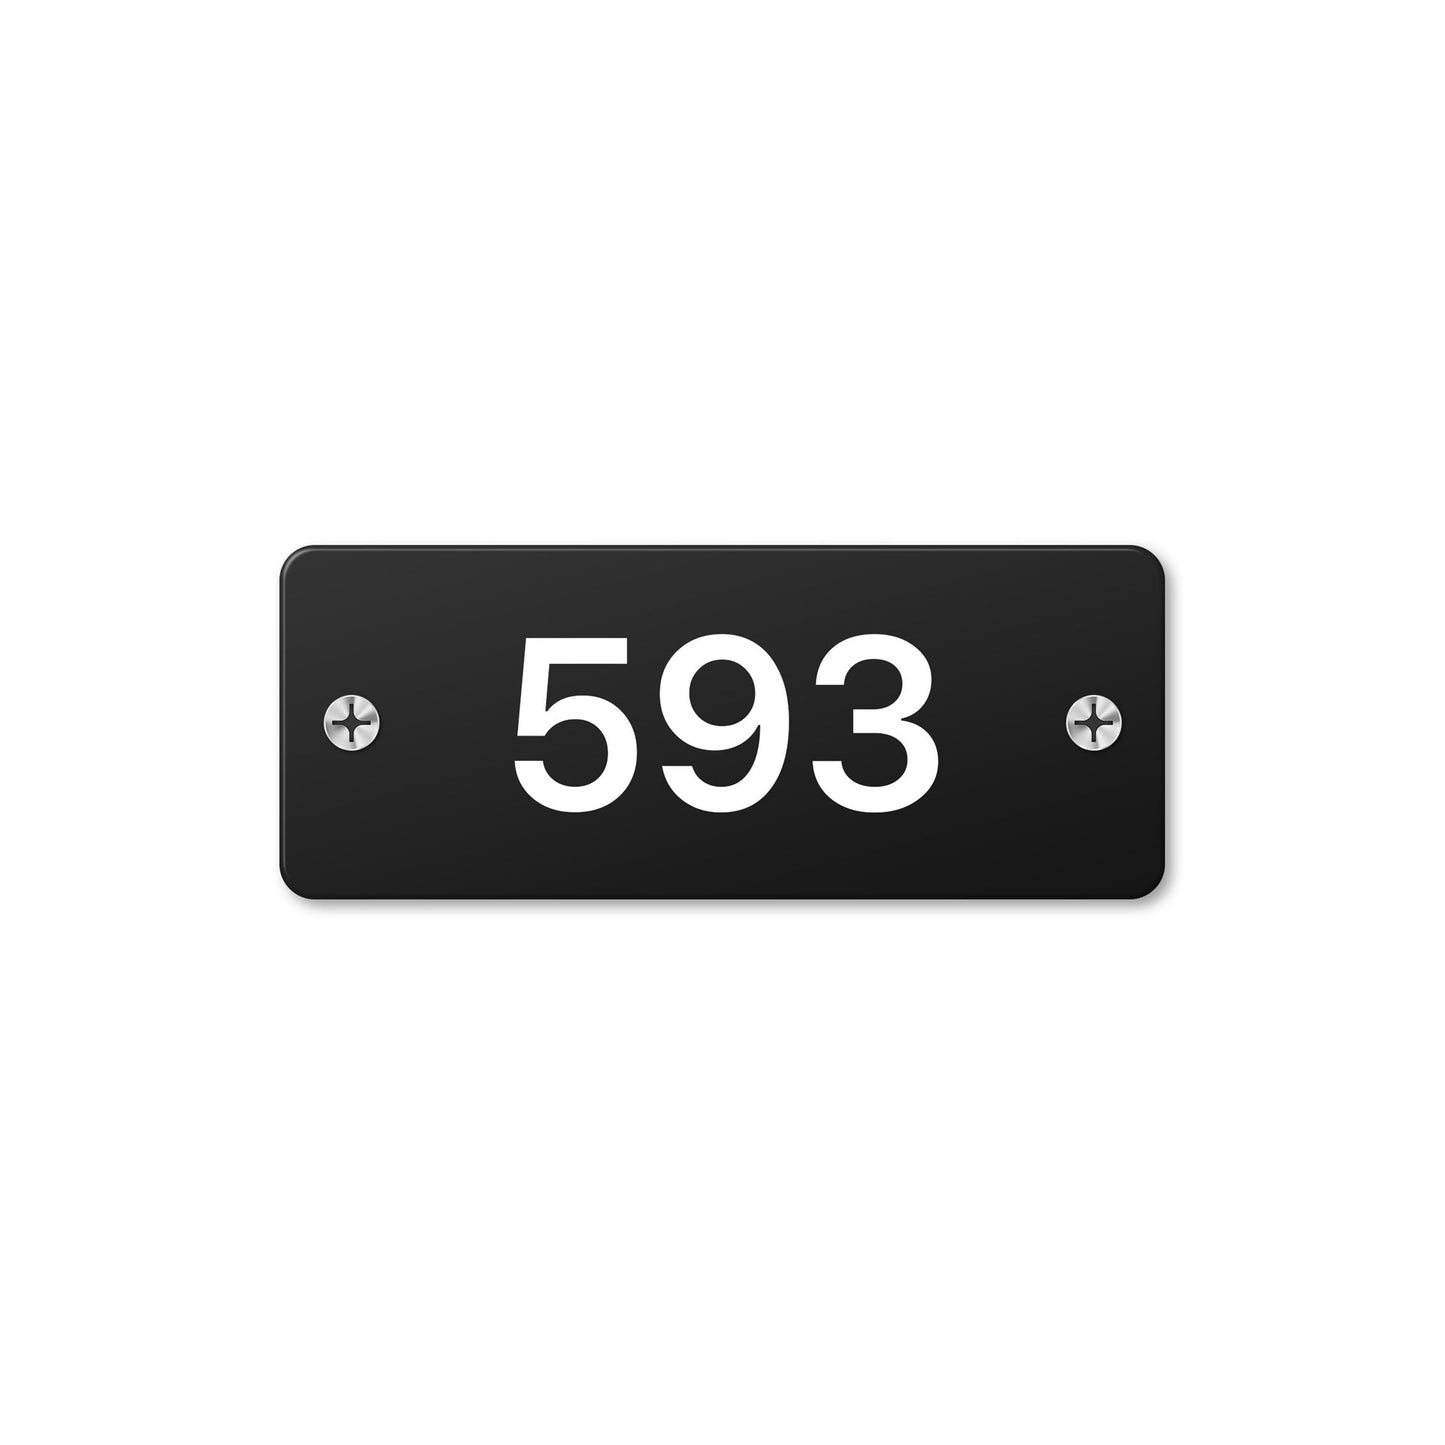 Numeral 593